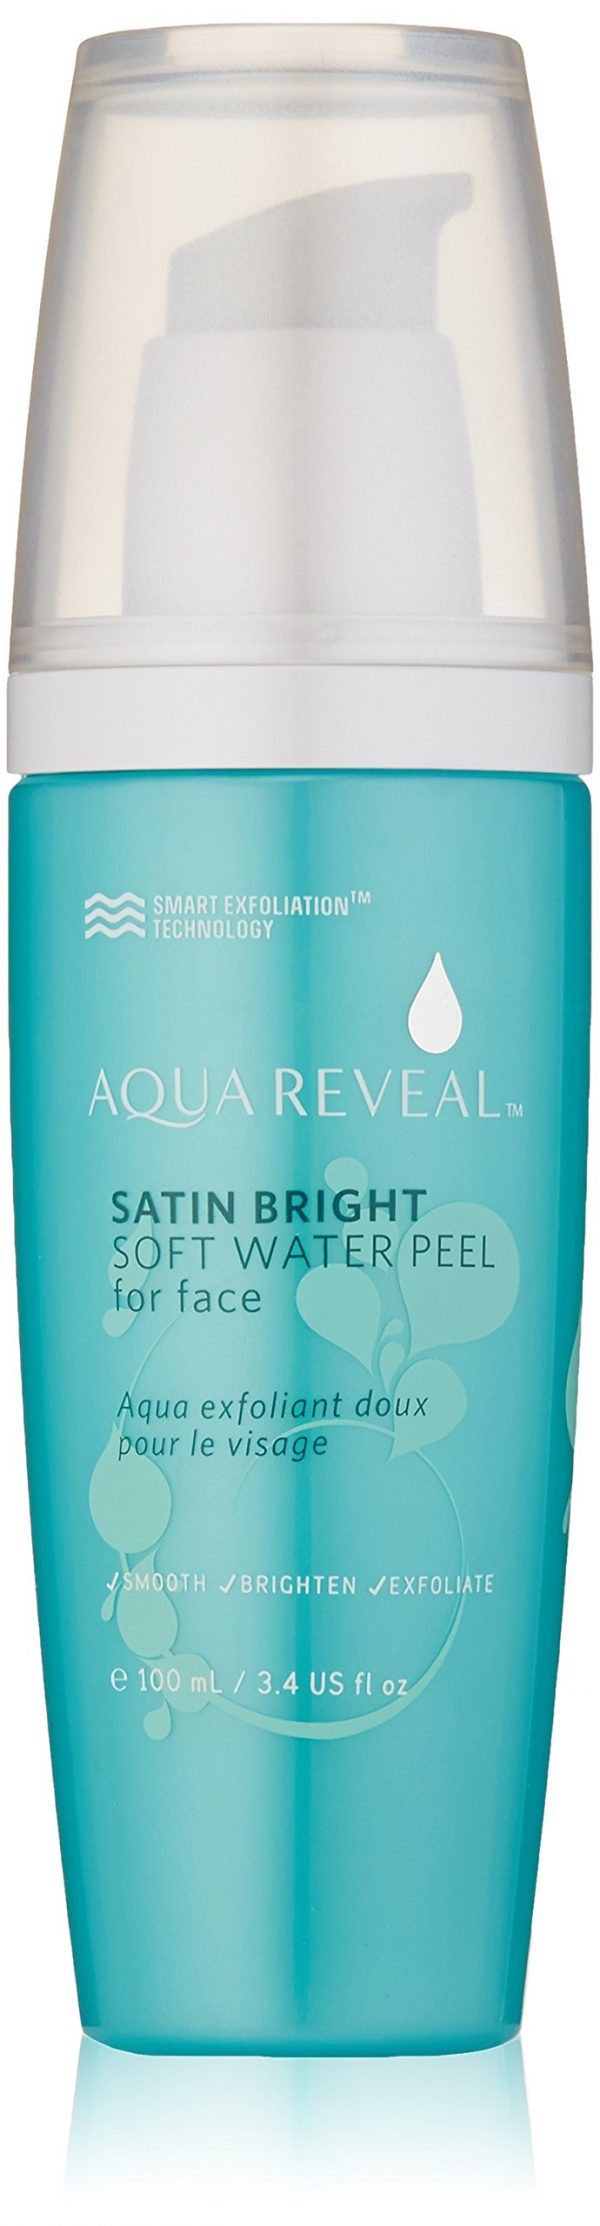 Satin Bright Soft Water Peel for Face